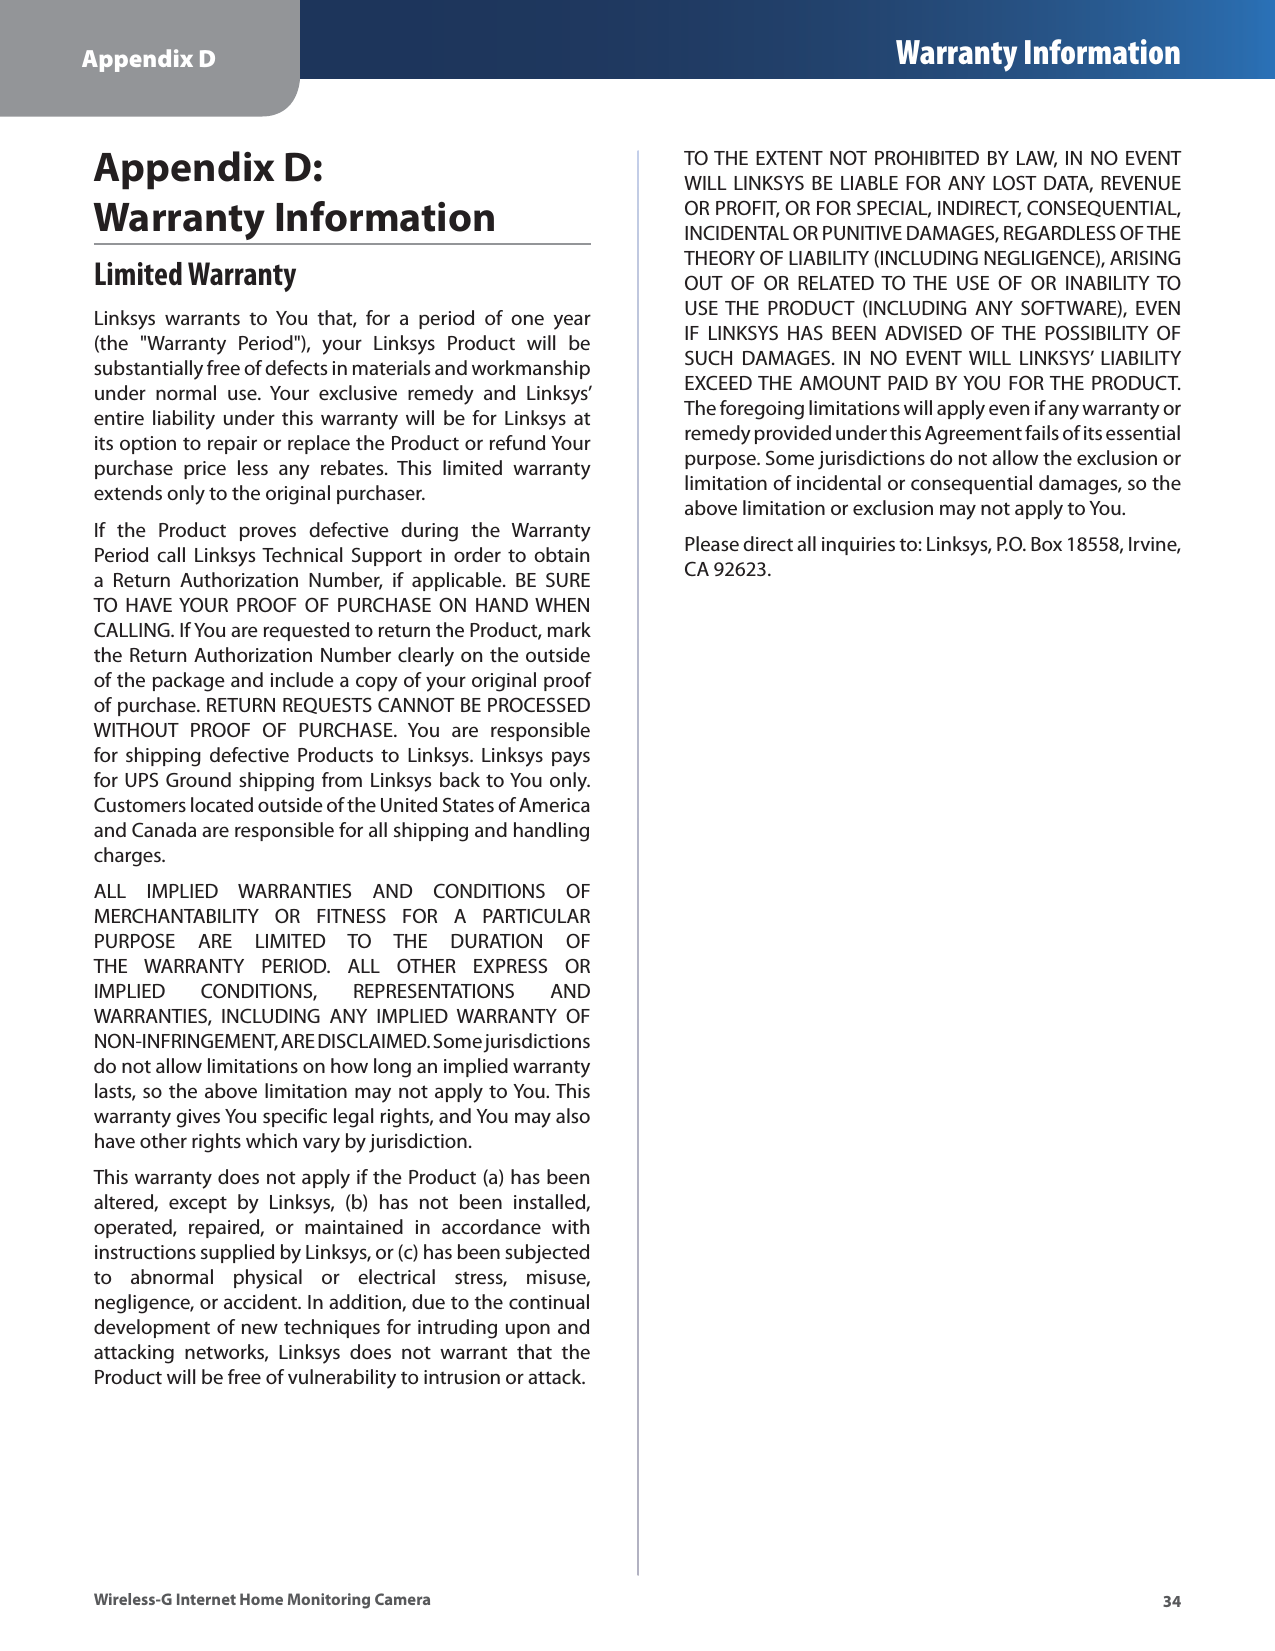 Appendix D Warranty Information34Wireless-G Internet Home Monitoring CameraLimited WarrantyLinksys warrants to You that, for a period of one year (the &quot;Warranty Period&quot;), your Linksys Product will  be substantially free of defects in materials and workmanship under normal  use. Your exclusive remedy and Linksys’ entire liability under this warranty will  be for Linksys at its option to repair or replace the Product or refund Your purchase price less any rebates. This limited warranty extends only to the original purchaser. If the Product proves defective during the Warranty Period call  Linksys Technical  Support in order to obtain a Return Authorization Number, if applicable. BE SURE TO HAVE YOUR PROOF OF PURCHASE ON HAND WHEN CALLING. If You are requested to return the Product, mark the Return Authorization Number clearly on the outside of the package and include a copy of your original proof of purchase. RETURN REQUESTS CANNOT BE PROCESSED WITHOUT  PROOF OF PURCHASE. You are responsible for shipping defective Products to Linksys. Linksys pays for UPS Ground shipping from Linksys back to You only. Customers located outside of the United States of America and Canada are responsible for all shipping and handling charges. ALL IMPLIED WARRANTIES AND CONDITIONS OF MERCHANTABILITY  OR FITNESS FOR A PARTICULAR PURPOSE ARE LIMITED TO THE DURATION OF THE WARRANTY  PERIOD. ALL OTHER EXPRESS OR IMPLIED CONDITIONS, REPRESENTATIONS AND WARRANTIES, INCLUDING ANY  IMPLIED WARRANTY  OF NON-INFRINGEMENT, ARE DISCLAIMED. Some j urisdictions do not allow limitations on how long an implied warranty lasts, so the above limitation may not apply to You. This warranty gives You specific legal rights, and You may also have other rights which vary by jurisdiction.This warranty does not apply if the Product (a) has been altered, except by Linksys, (b) has not been installed, operated, repaired, or maintained in accordance with instructions supplied by Linksys, or (c) has been subjected to abnormal  physical  or electrical  stress, misuse, negligence, or accident. In addition, due to the continual development of new techniques for intruding upon and attacking networks, Linksys does not warrant that the Product will be free of vulnerability to intrusion or attack.TO THE EXTENT NOT PROHIBITED BY LAW, IN NO EVENT WILL LINKSYS BE LIABLE FOR ANY LOST  DATA, REVENUE OR PROFIT, OR FOR SPECIAL, INDIRECT, CONSEQUENTIAL, INCIDENTAL OR PUNITIVE DAMAGES, REGARDLESS OF THE THEORY OF LIABILITY (INCLUDING NEGLIGENCE), ARISING OUT  OF OR RELATED TO THE USE OF OR INABILITY TO USE THE PRODUCT  (INCLUDING ANY  SOFTWARE), EVEN IF LINKSYS HAS BEEN ADVISED OF THE POSSIBILITY  OF SUCH DAMAGES. IN NO EVENT WILL LINKSYS’ LIABILITY EXCEED THE AMOUNT PAID BY YOU FOR THE PRODUCT. The foregoing limitations will apply even if any warranty or remedy provided under this Agreement fails of its essential purpose. Some jurisdictions do not allow the exclusion or limitation of incidental or consequential damages, so the above limitation or exclusion may not apply to You.Please direct all inquiries to: Linksys, P. O.  Box 18558, Irvine, CA 92623.Appendix D:  Warranty Information